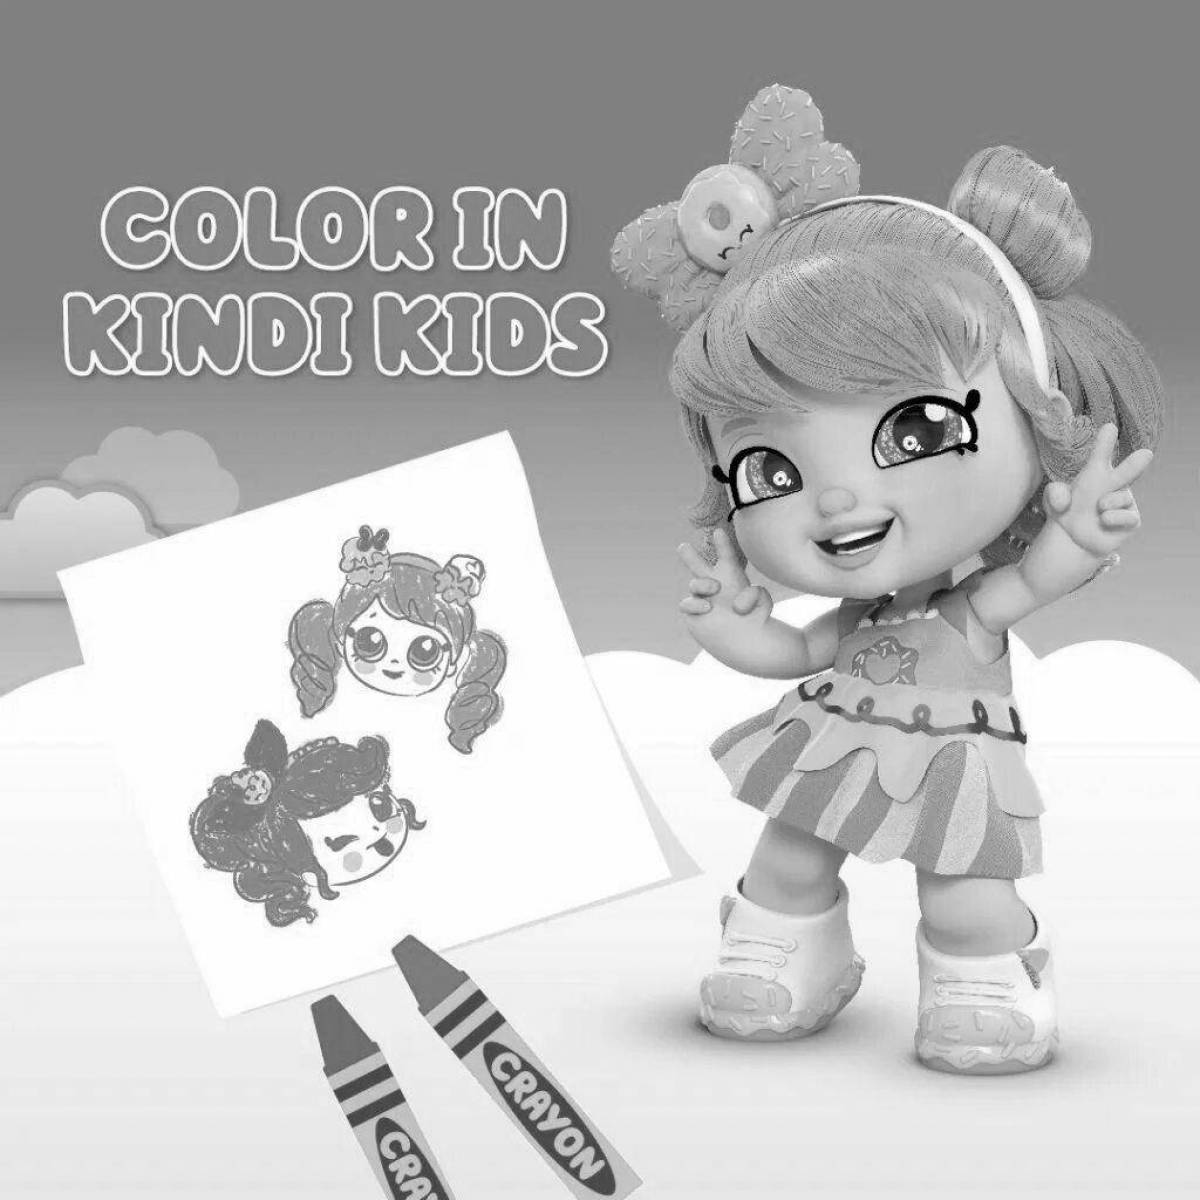 Glorious candy coloring book for kids